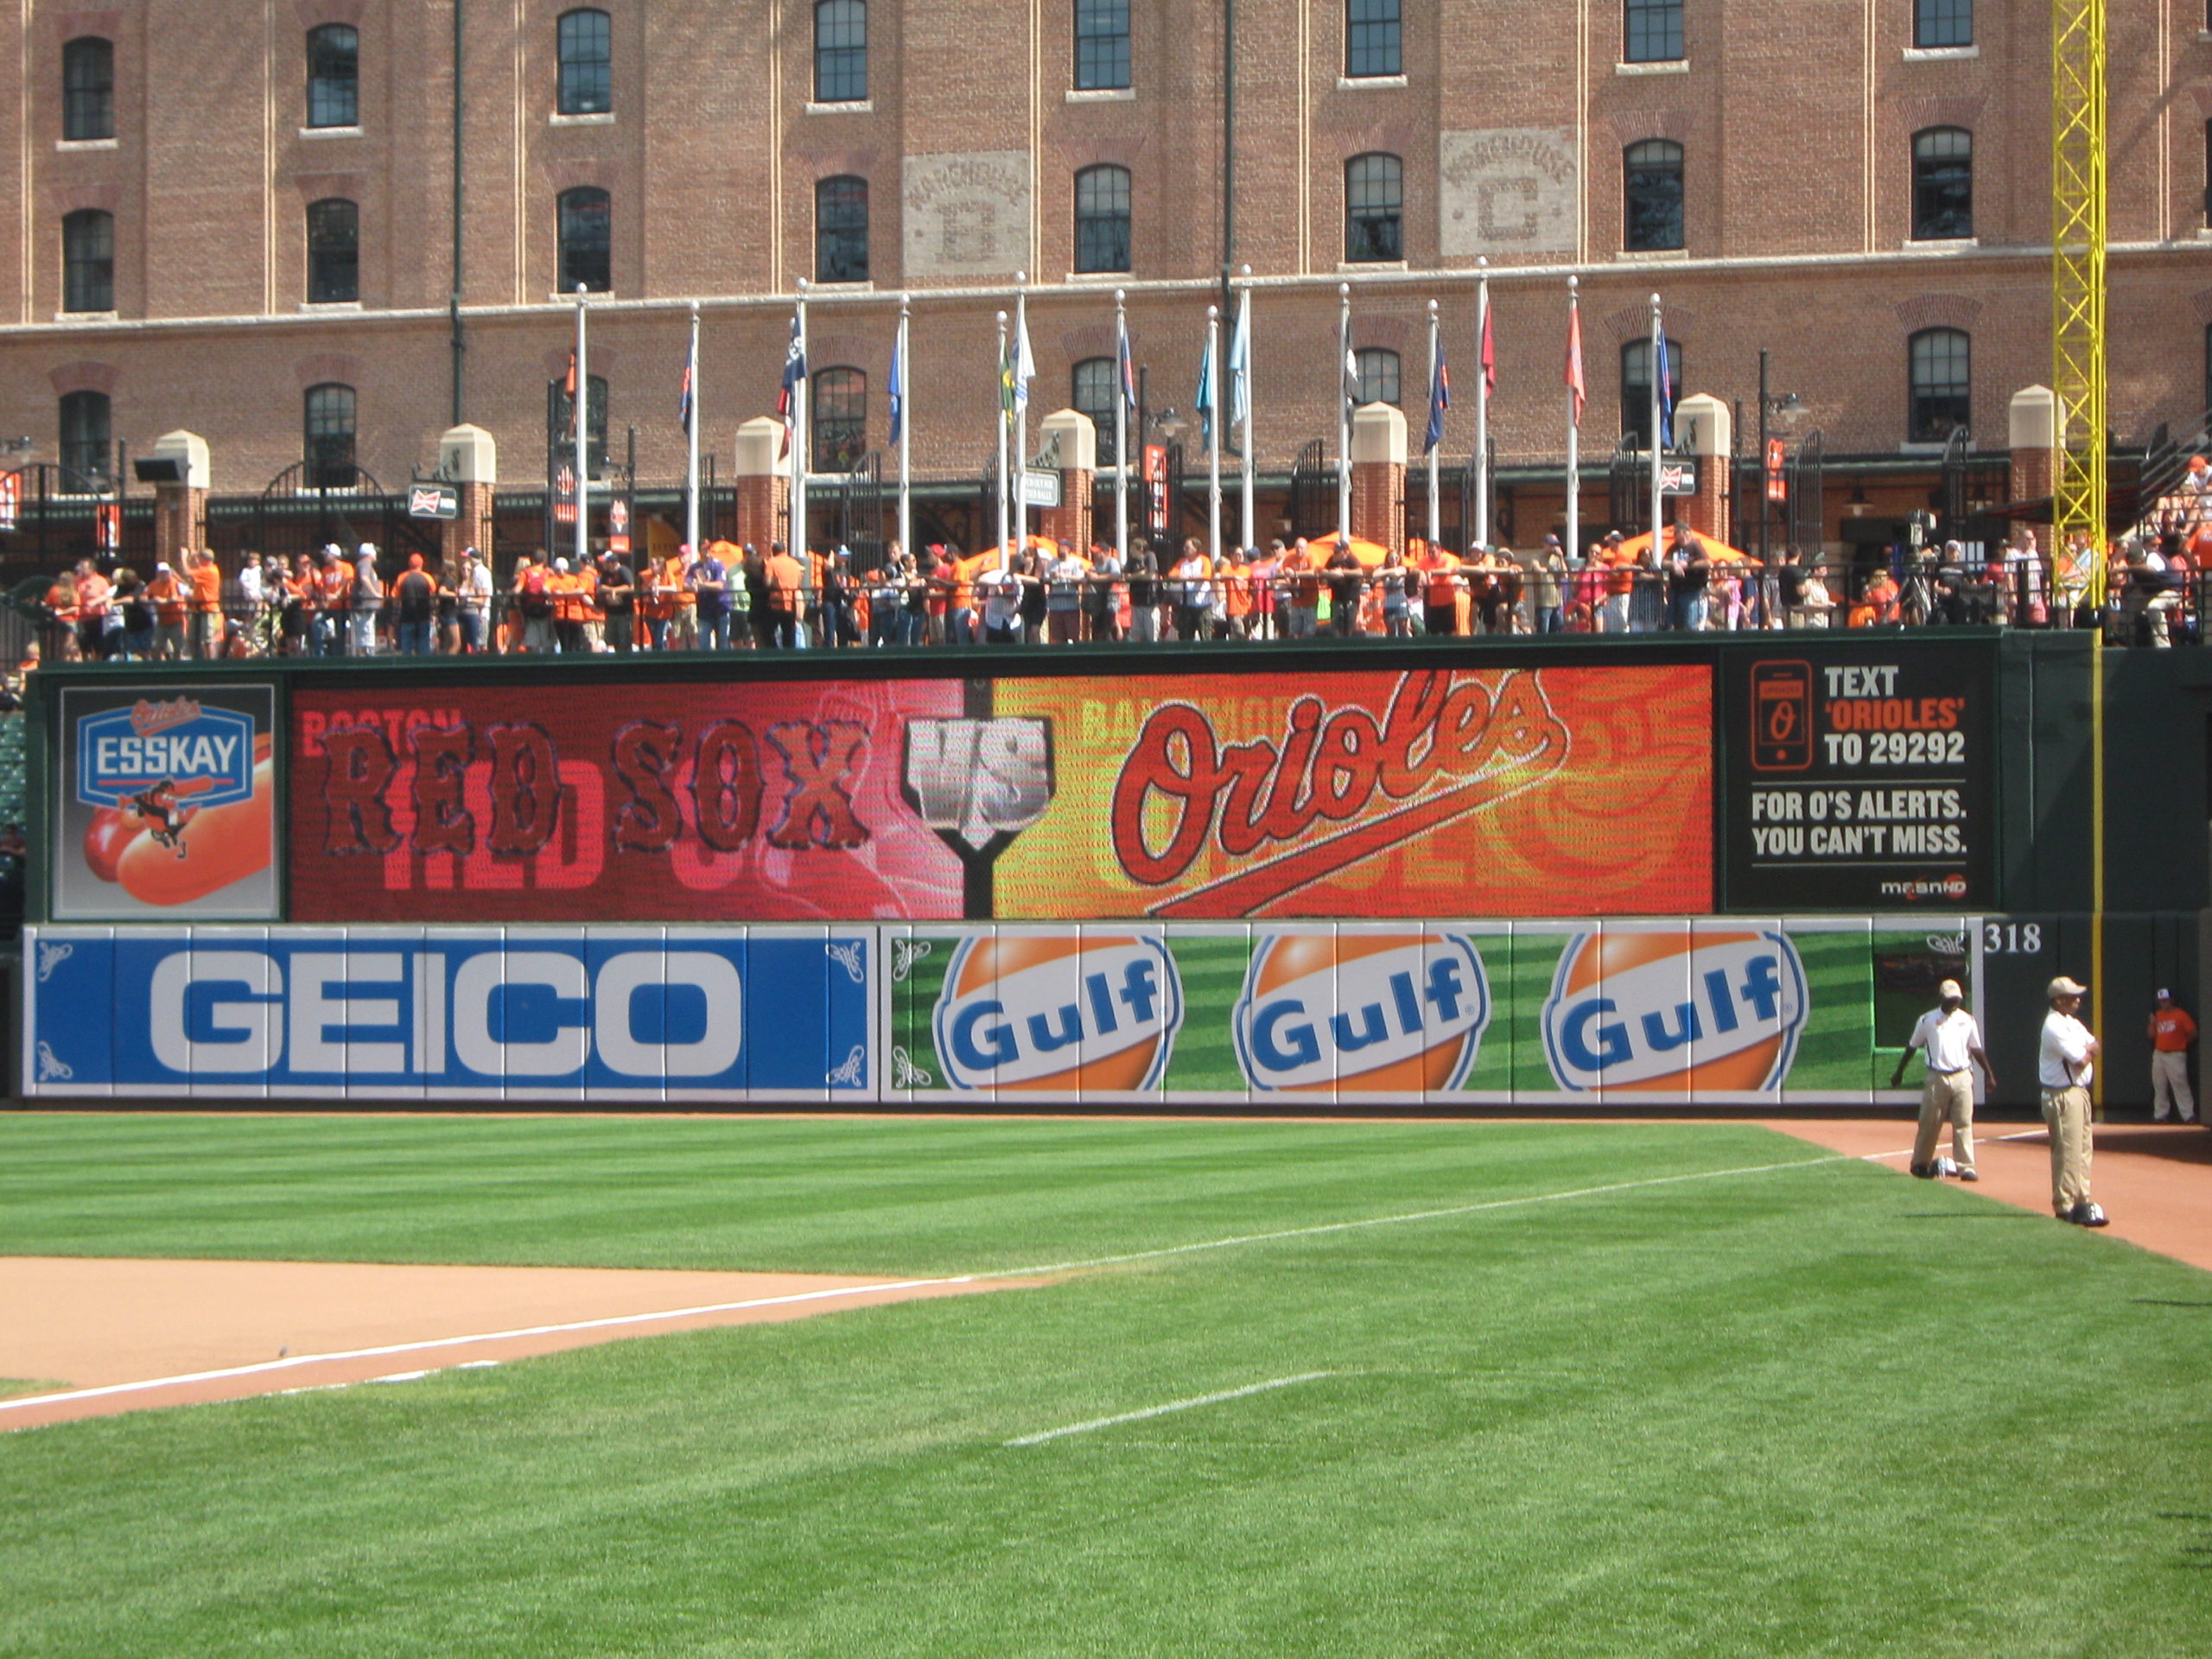 The Red Sox Fan Guide to Camden Yards